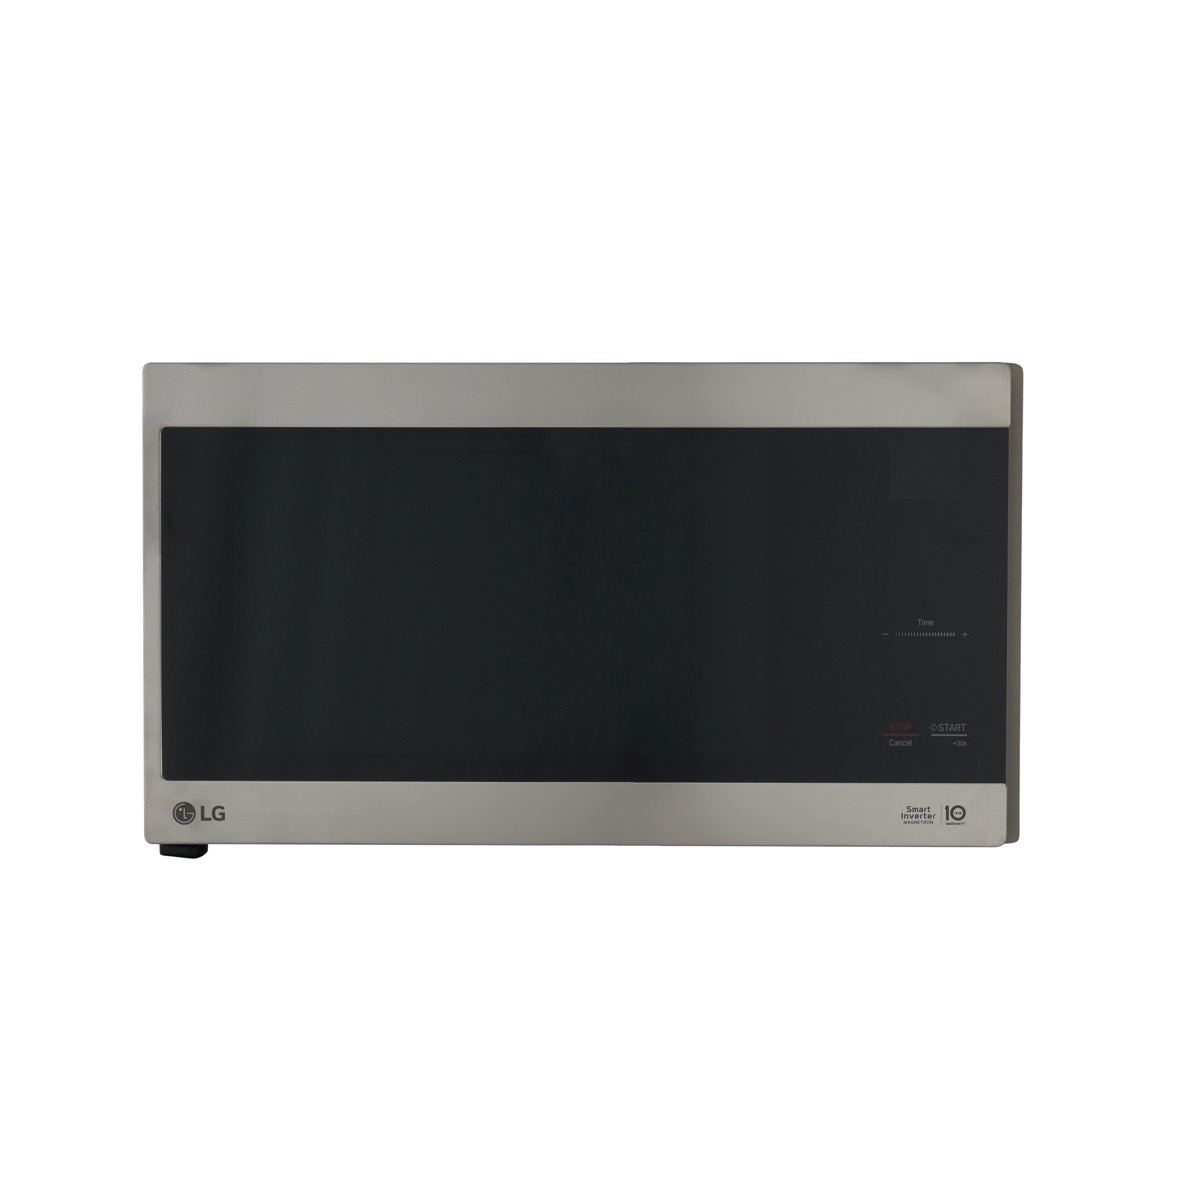 LG Solo Microwave, 42 Liter, Silver - MS4295CIS